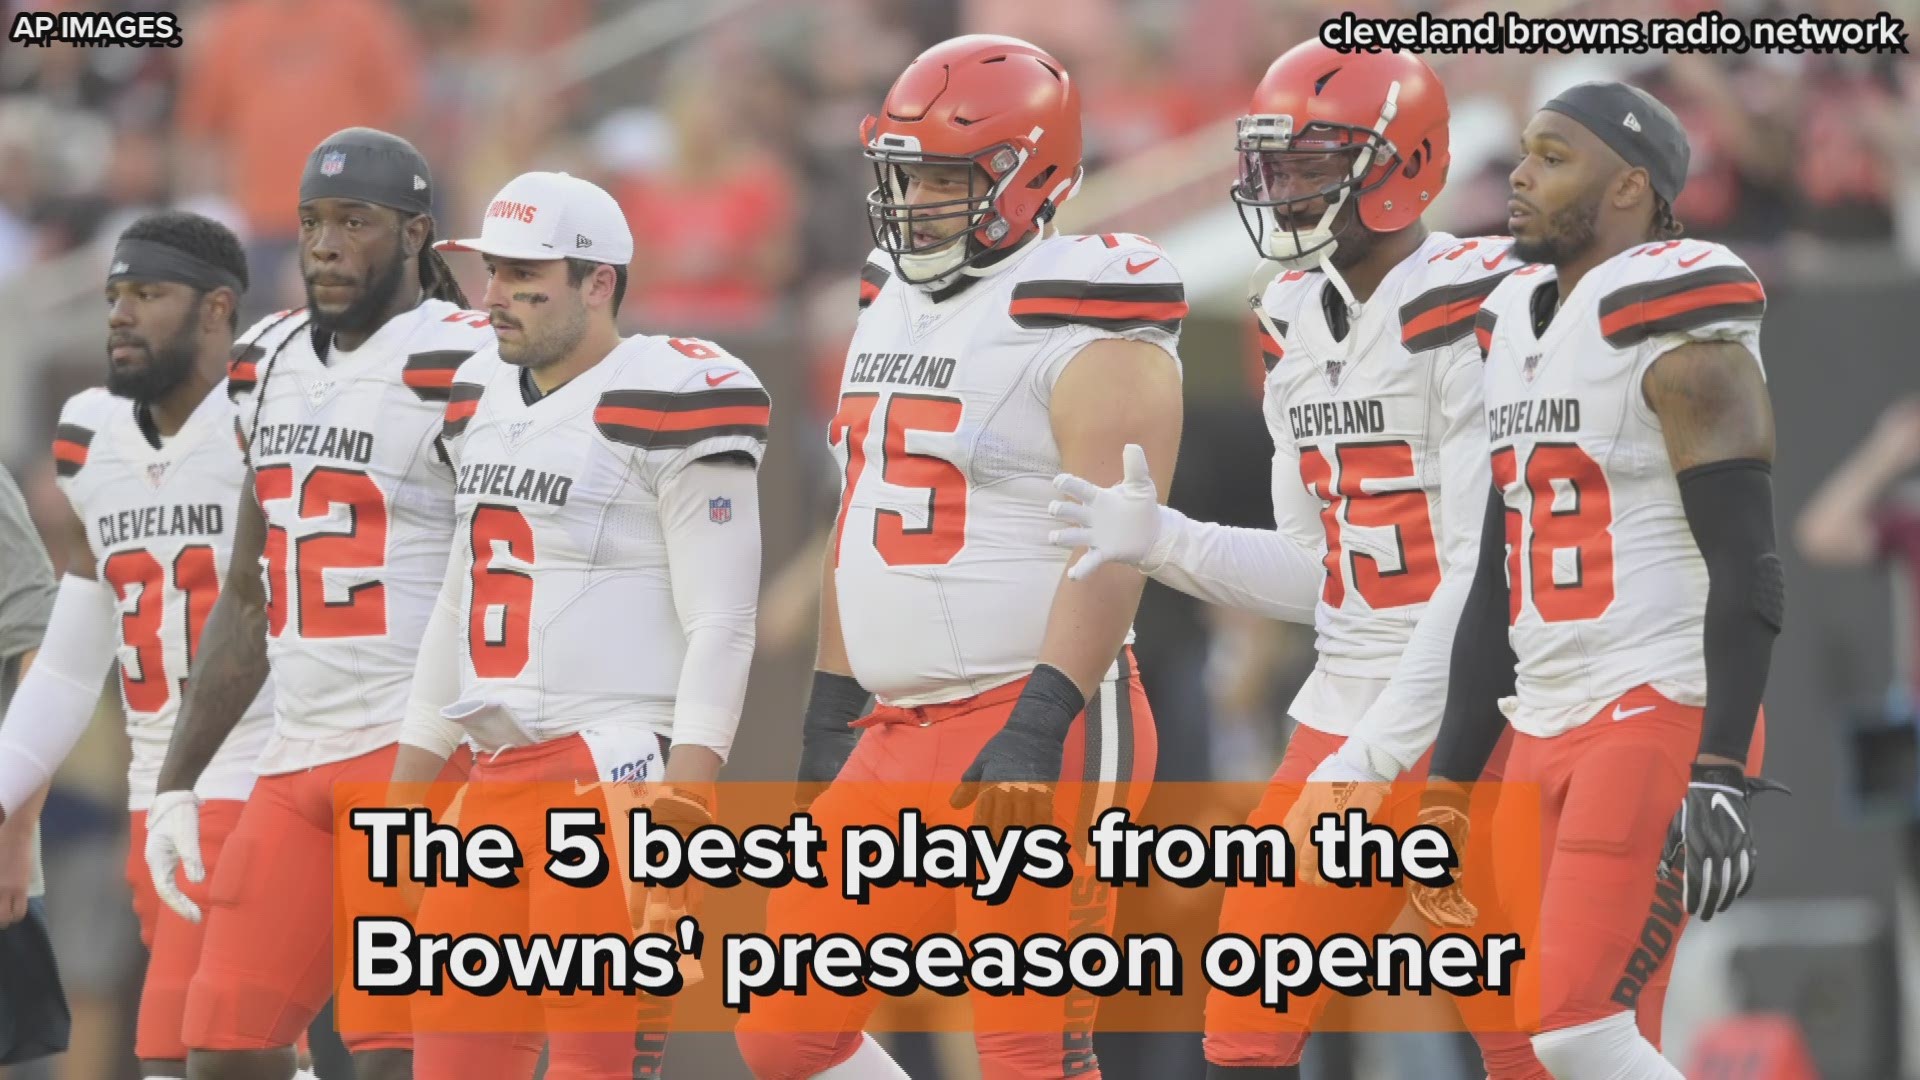 The Cleveland Browns beat the Washington Redskins 30-10 in their 2019 preseason opener on Thursday. Here are the five best plays from the opener.